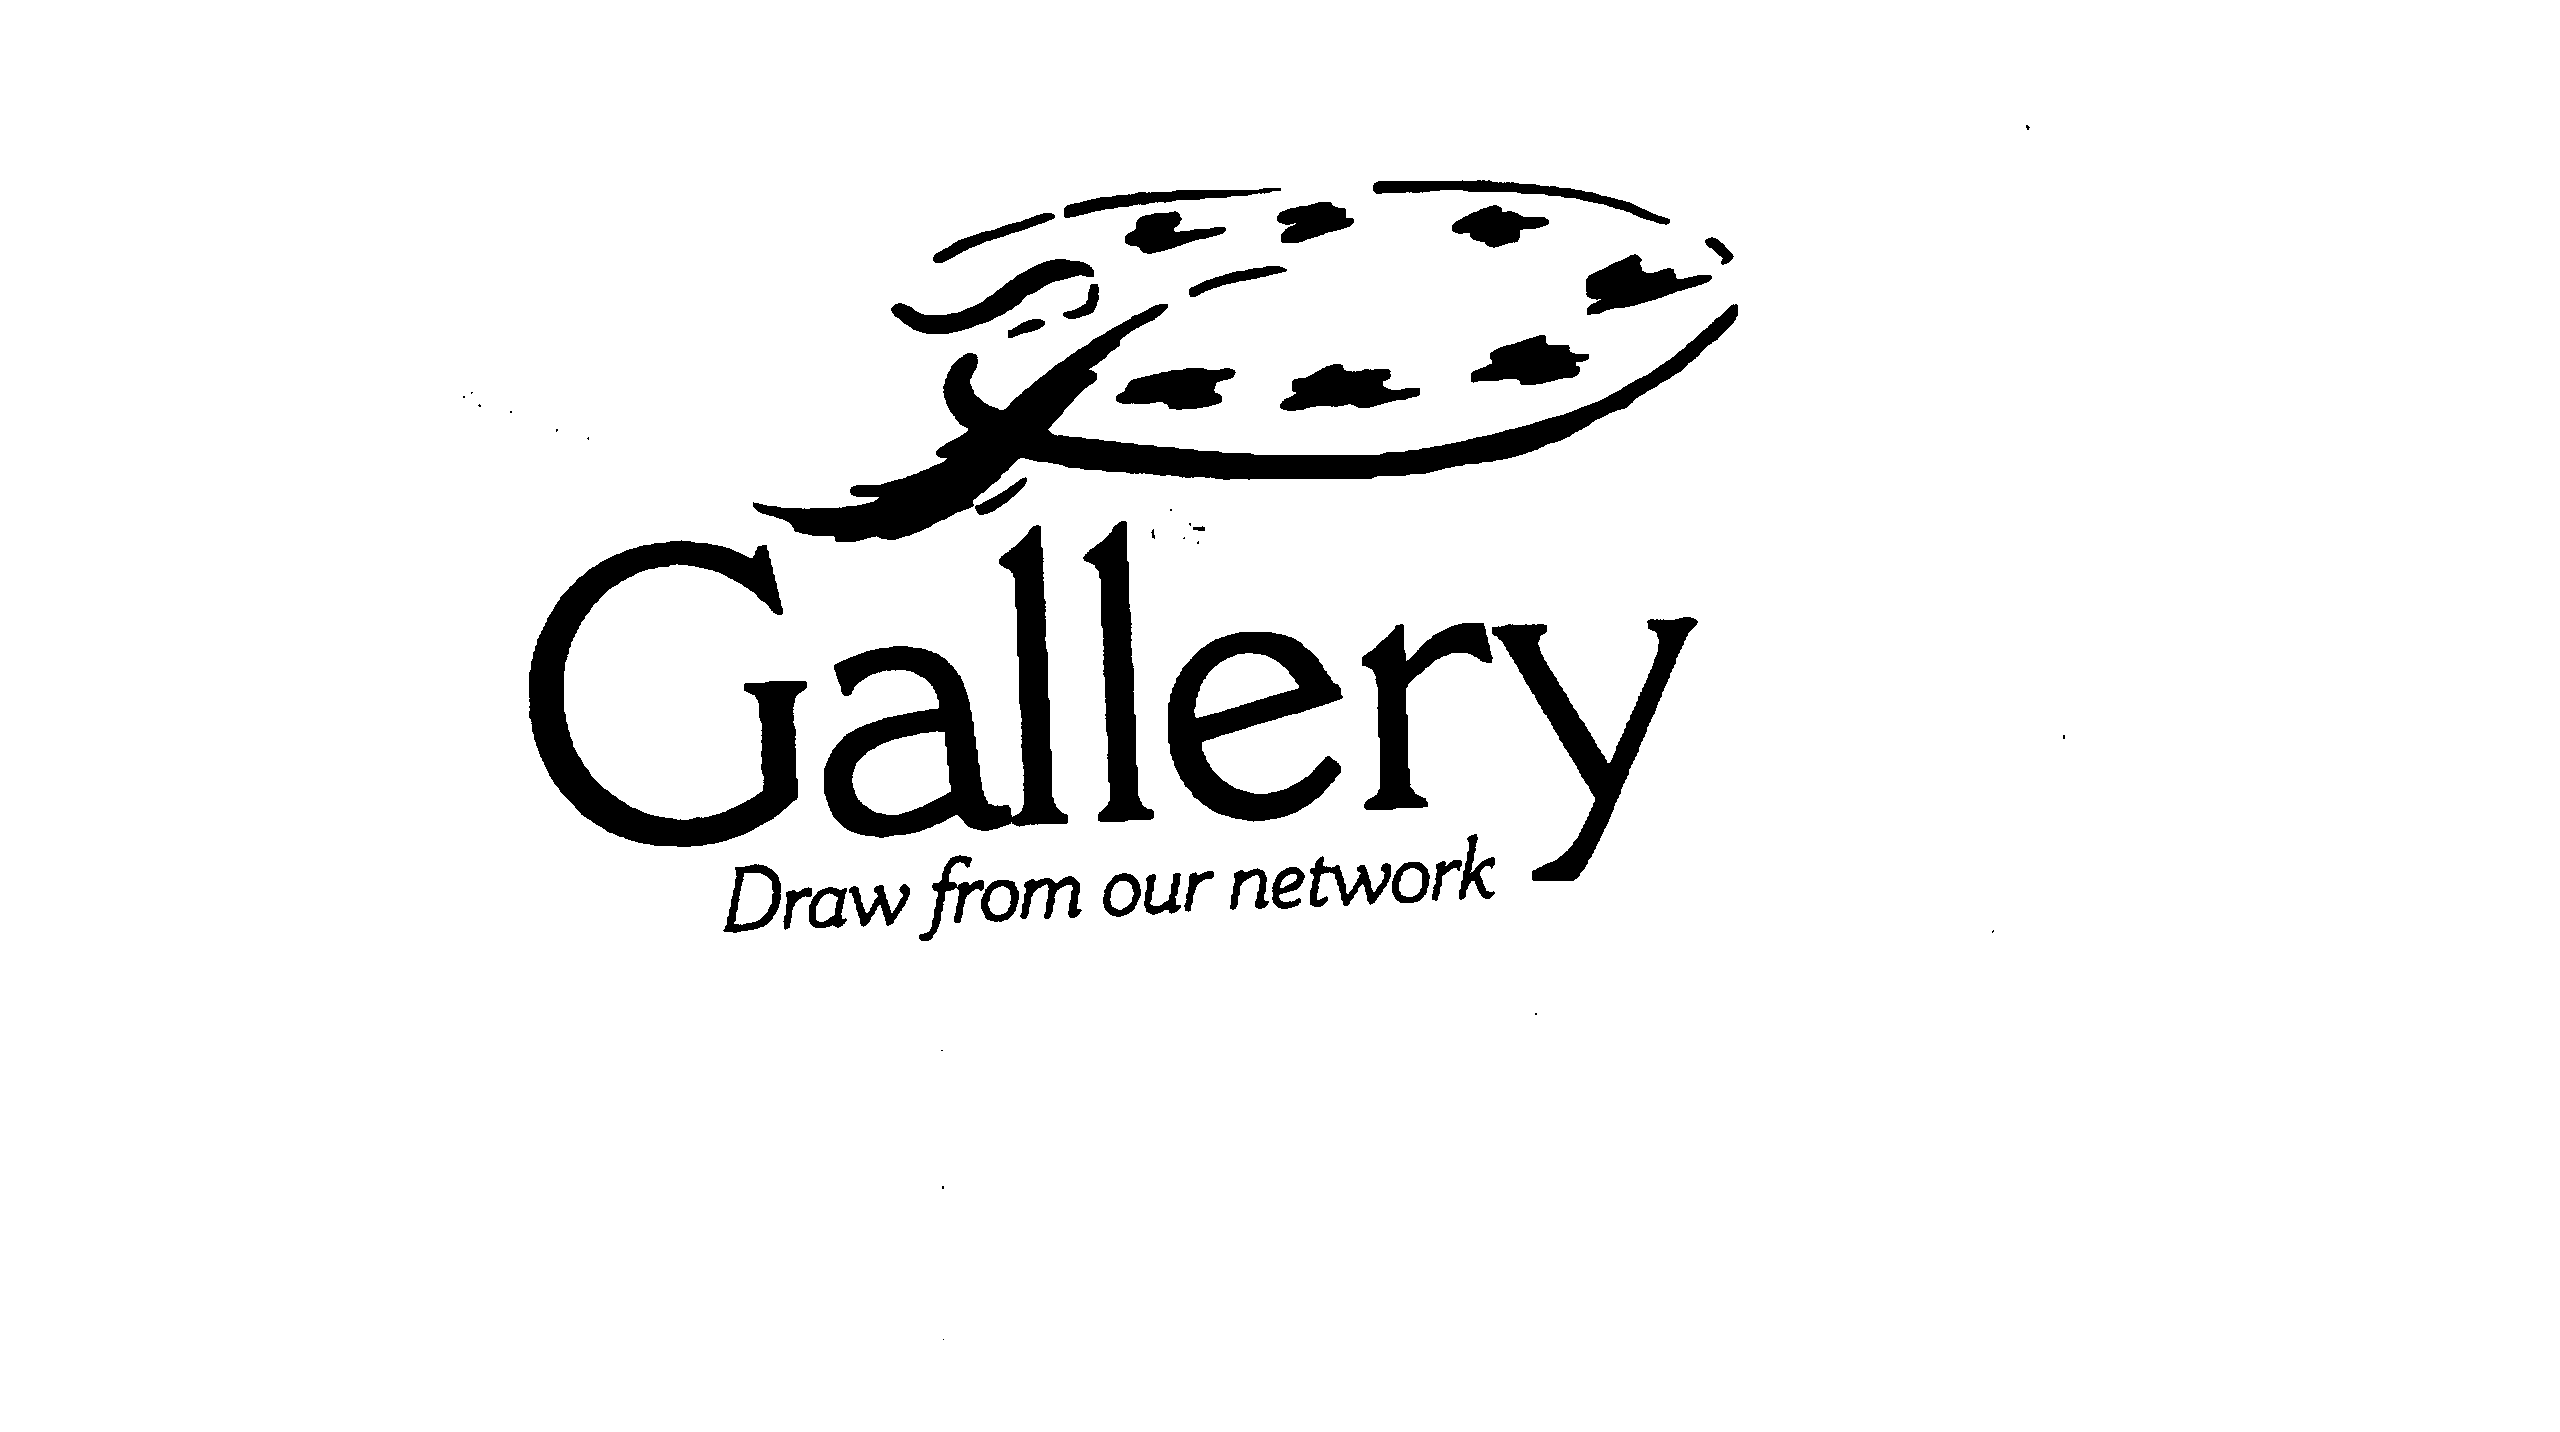  GALLERY DRAW FROM OUR NETWORK